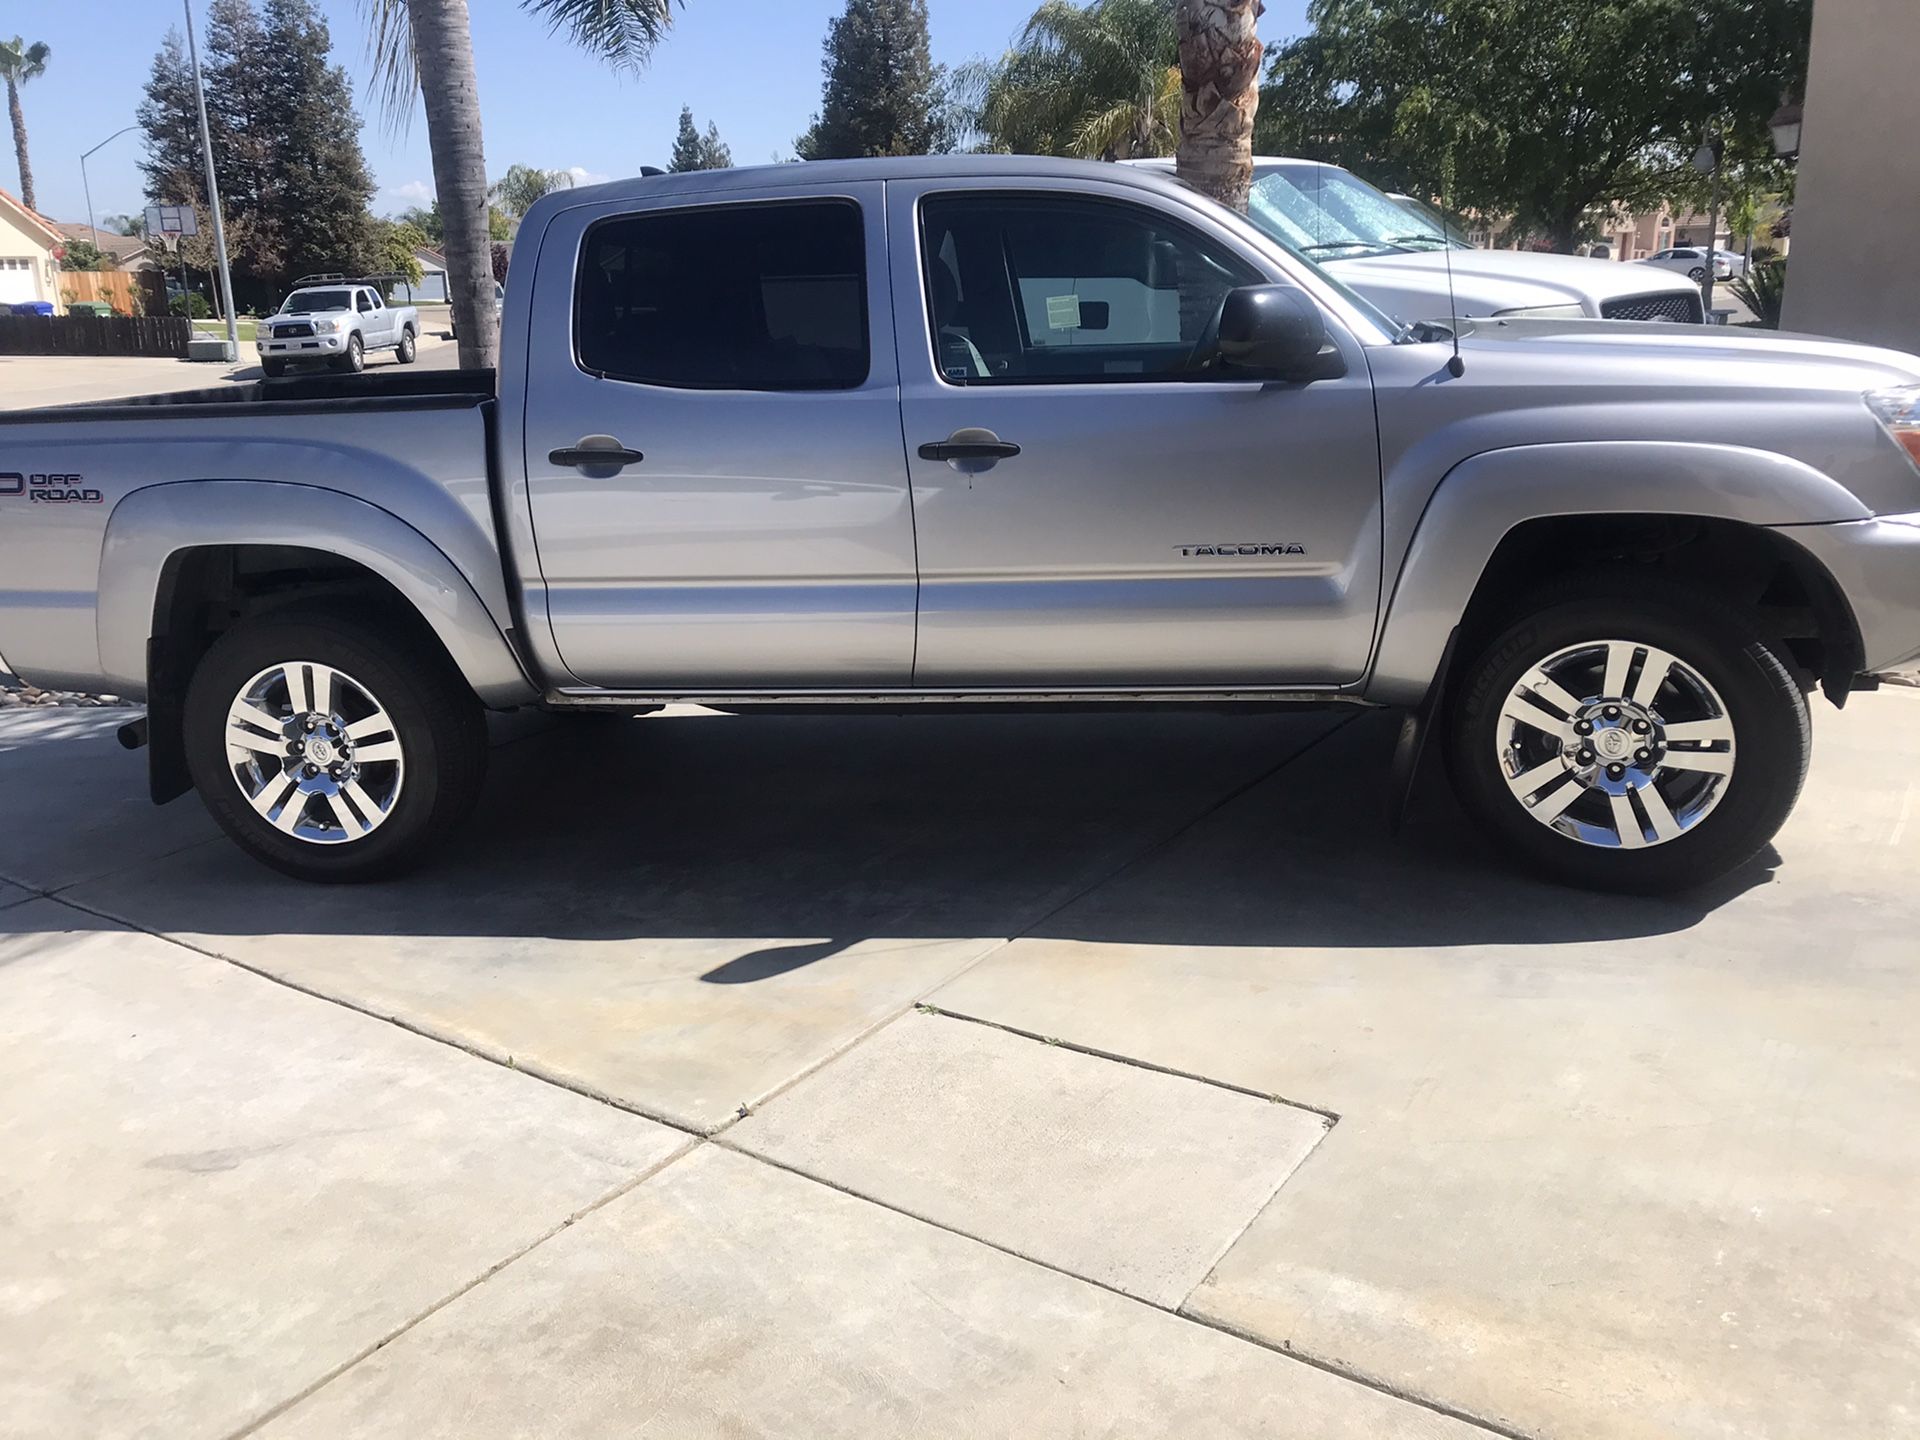 Toyota Tacoma 18”wheels and tires.